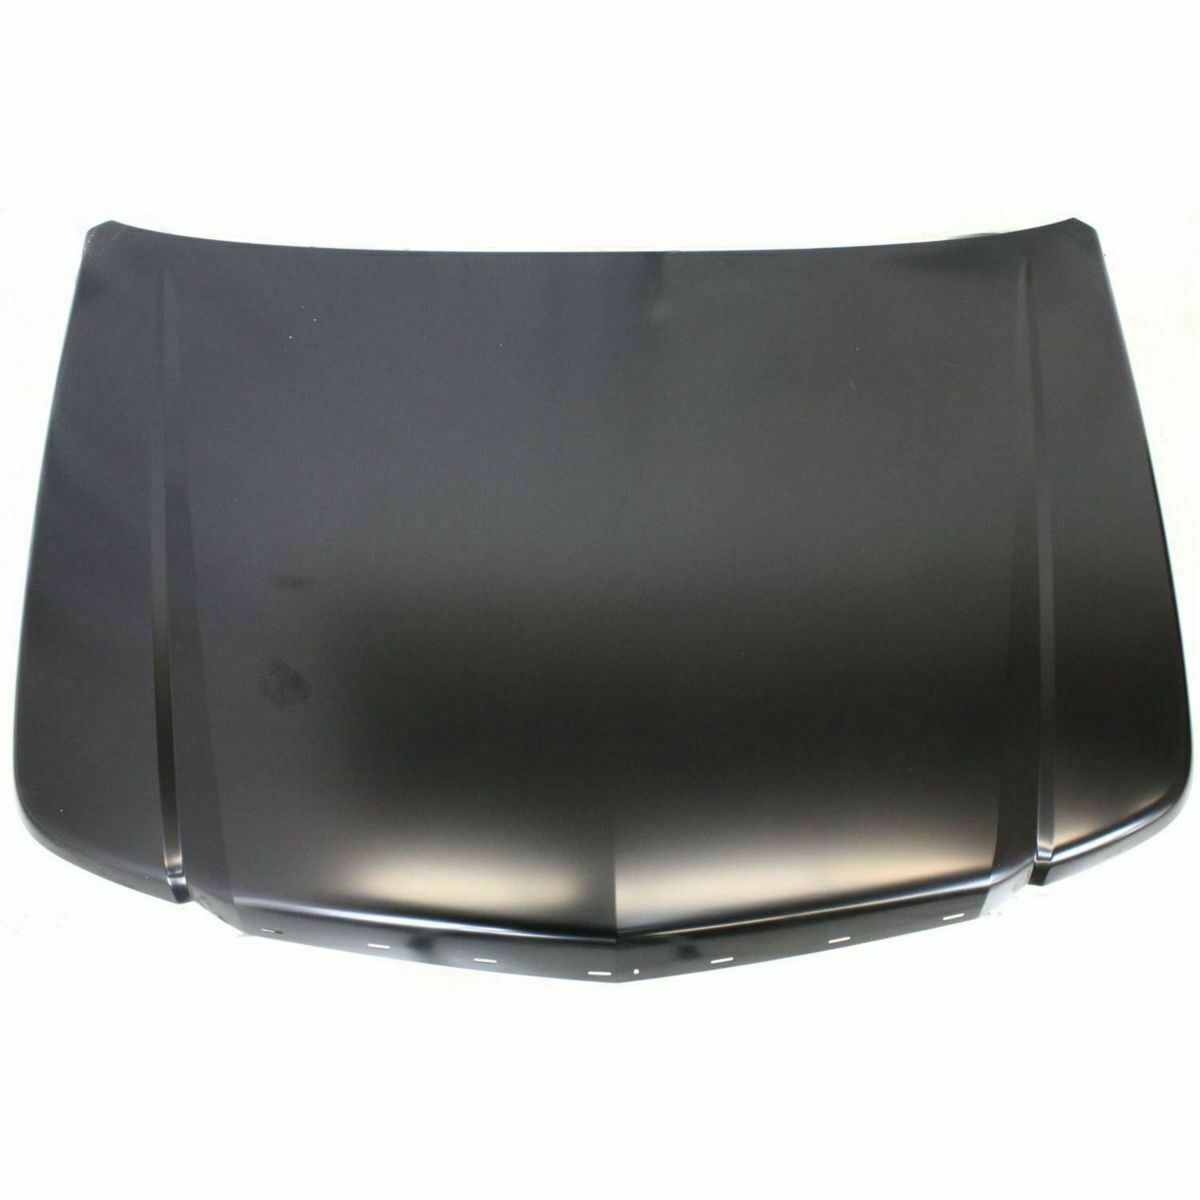 2002-2006 CADILLAC ESCALADE Hood Painted to Match